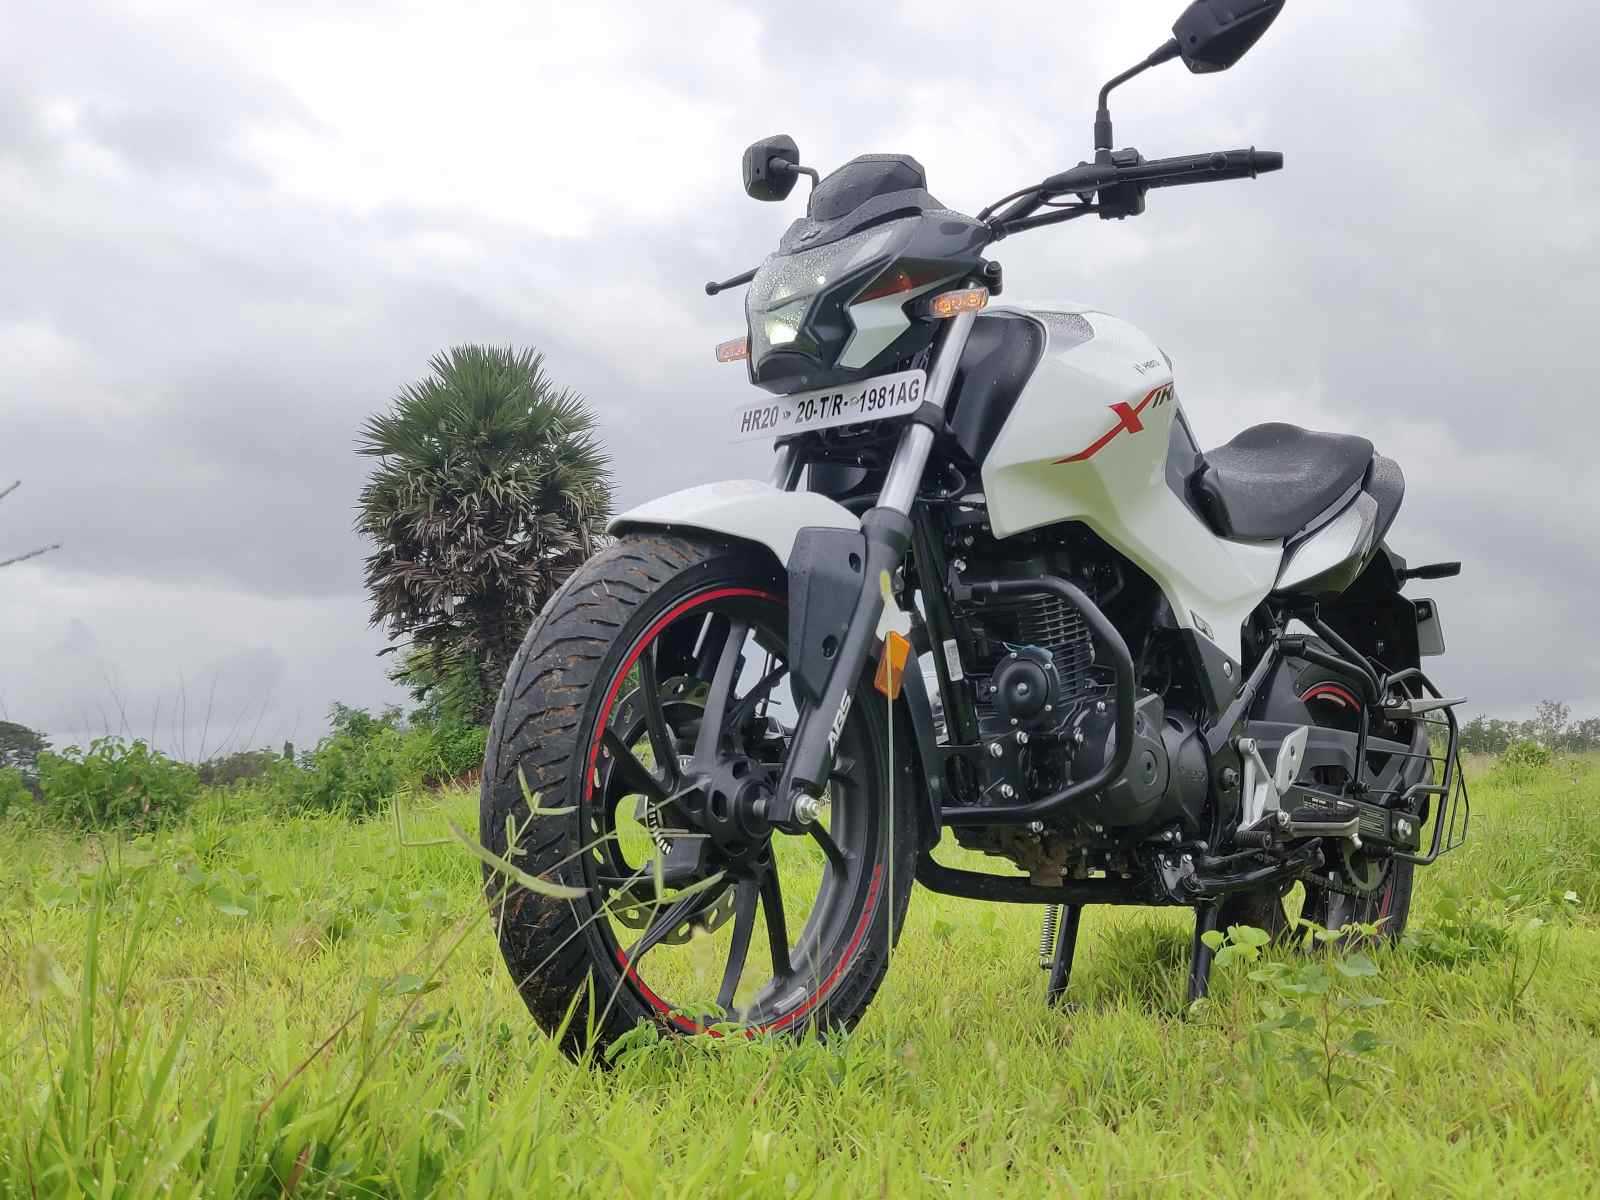 Hero Motocorp News Launches Reviews From India Motoroids